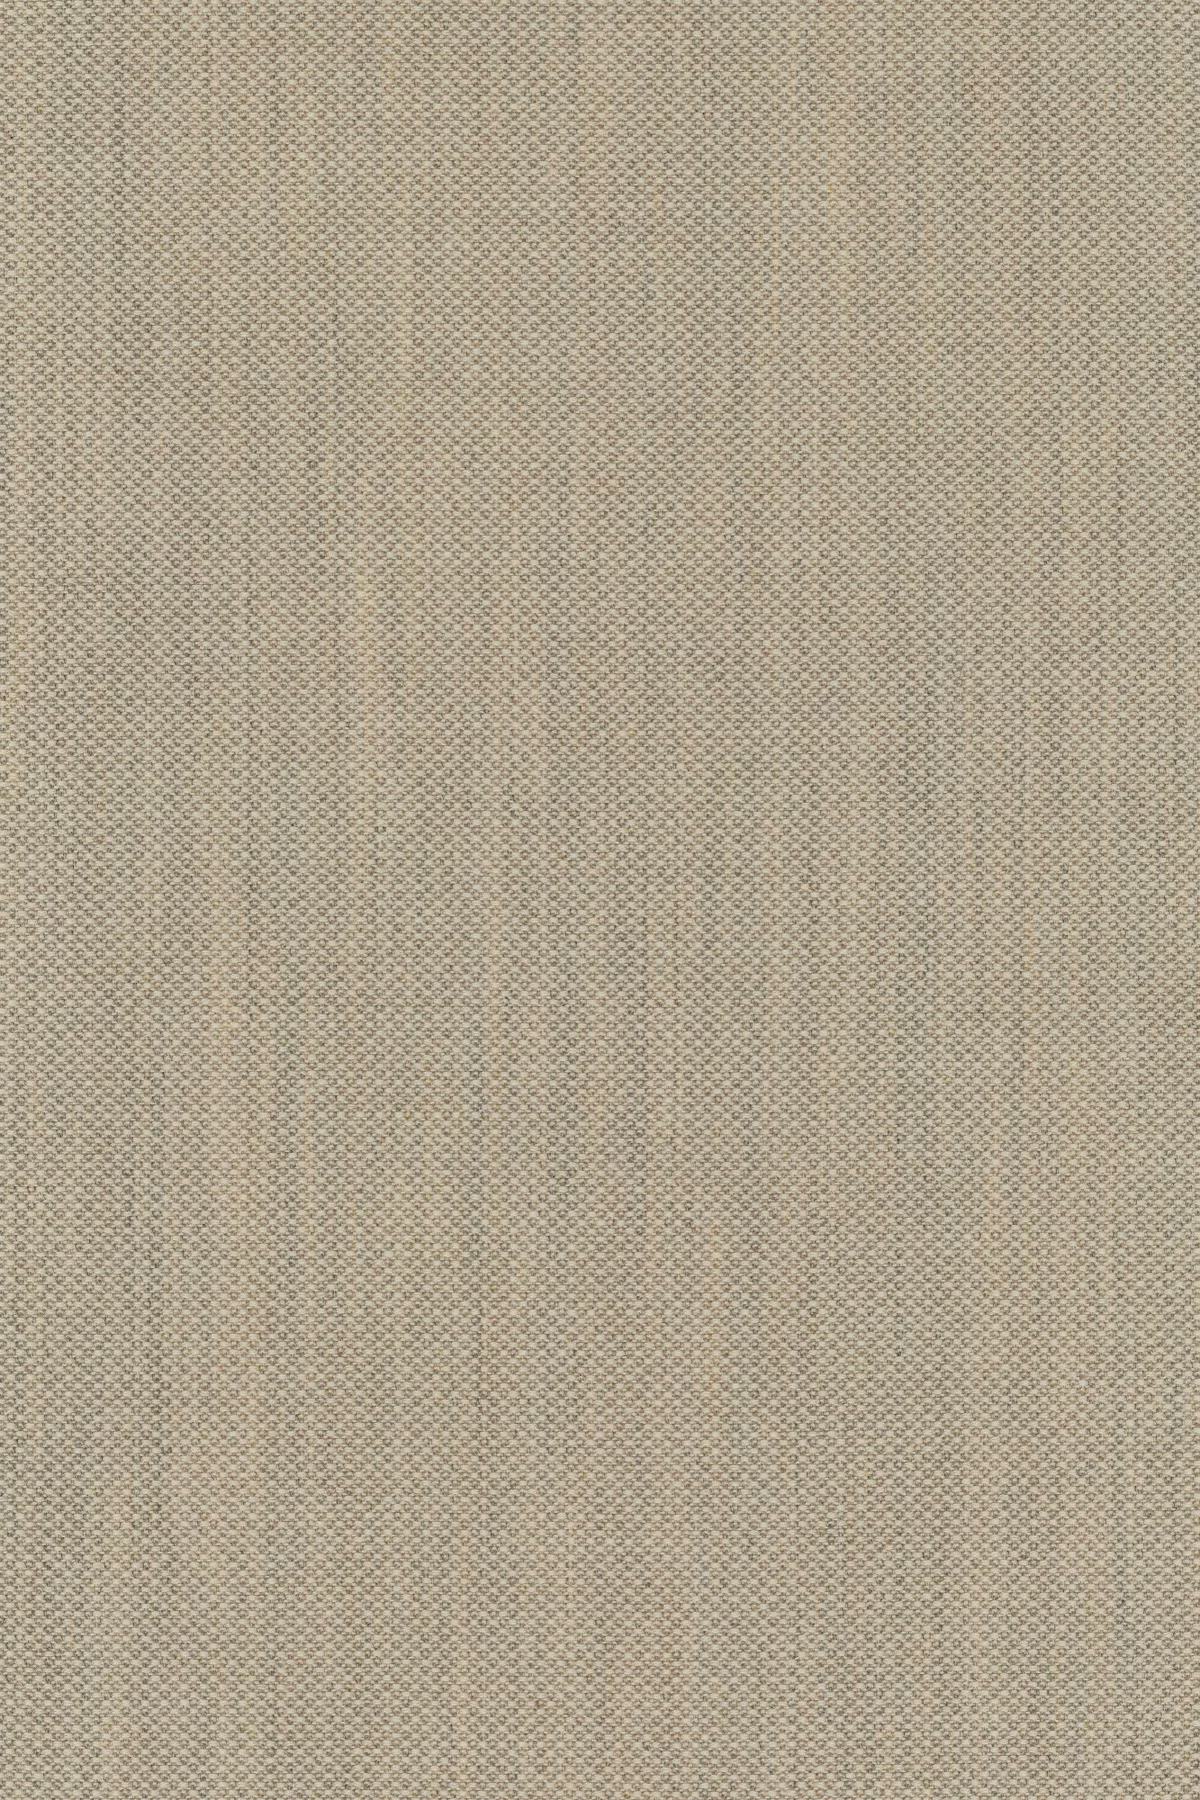 Fabric sample Fiord brown